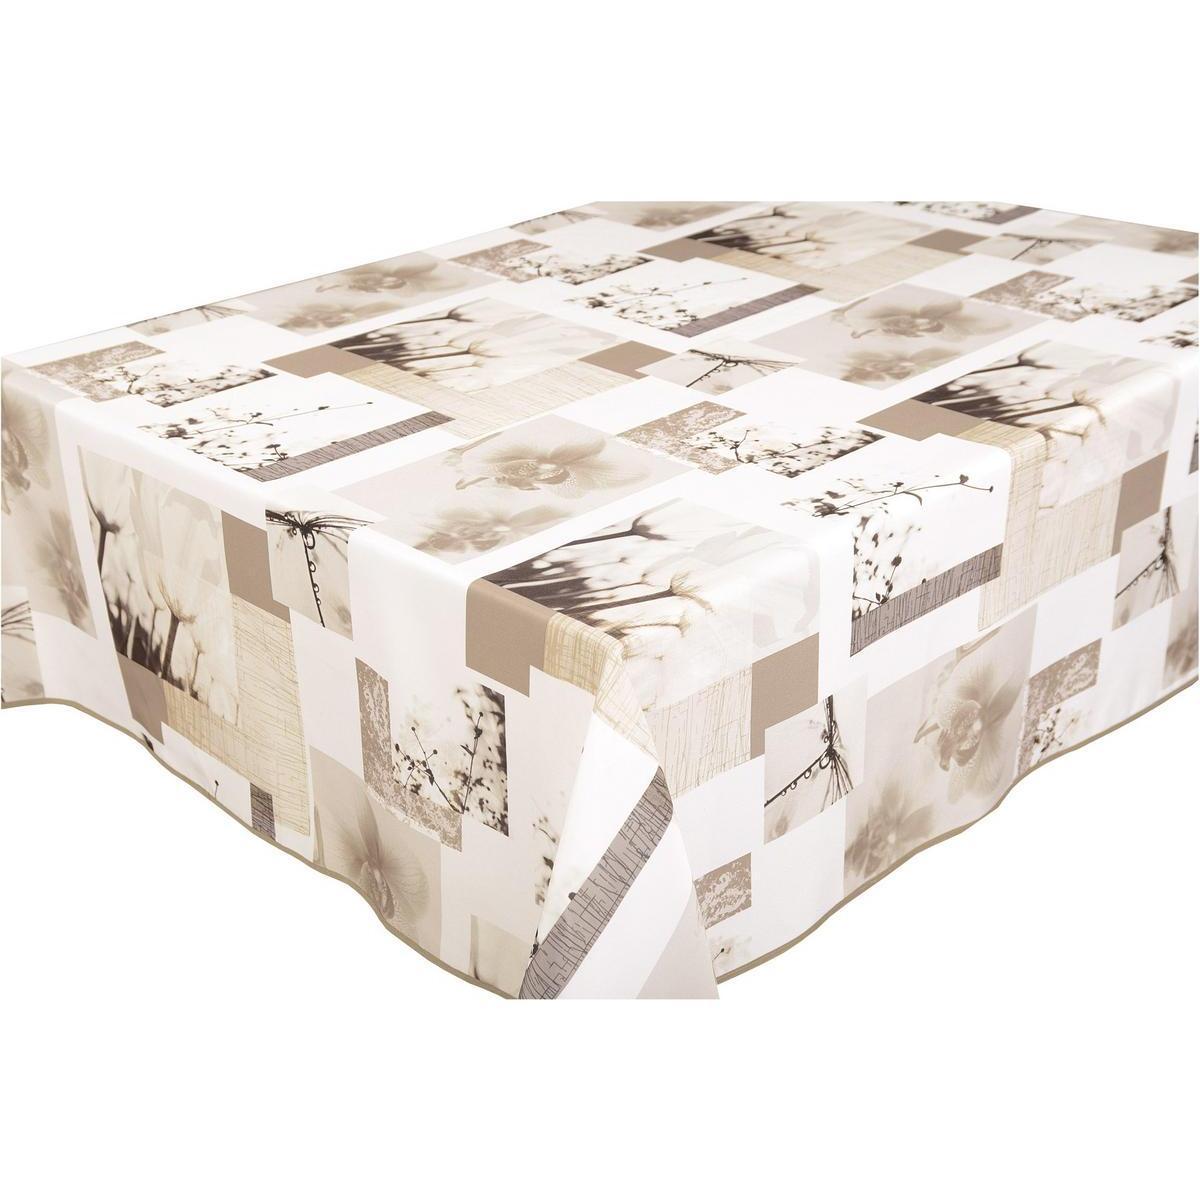 Toile cirée rectangulaire - 100 % Polyester - 145 x 300 cm - Beige taupe